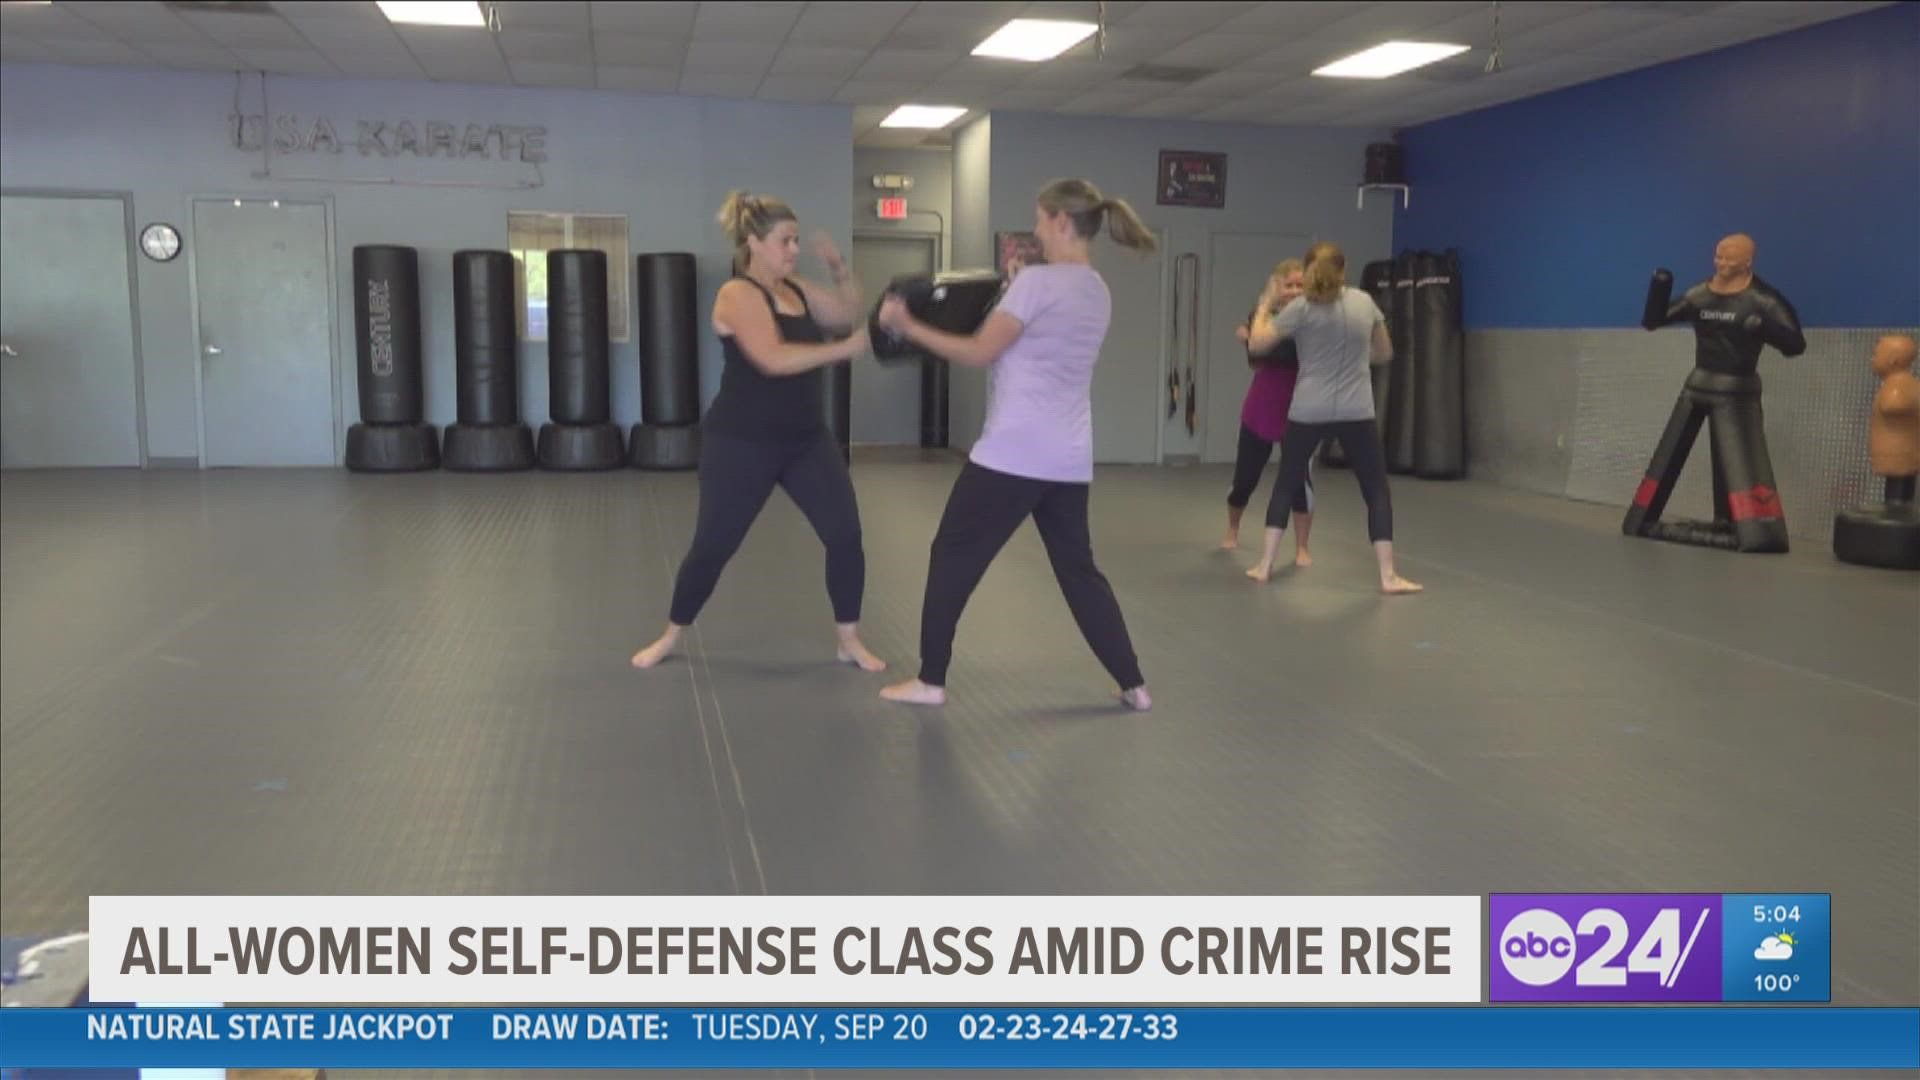 ABC24’s Brittani Moncrease went to USA Karate in Germantown where more classes have been added just to accommodate the increased interest.